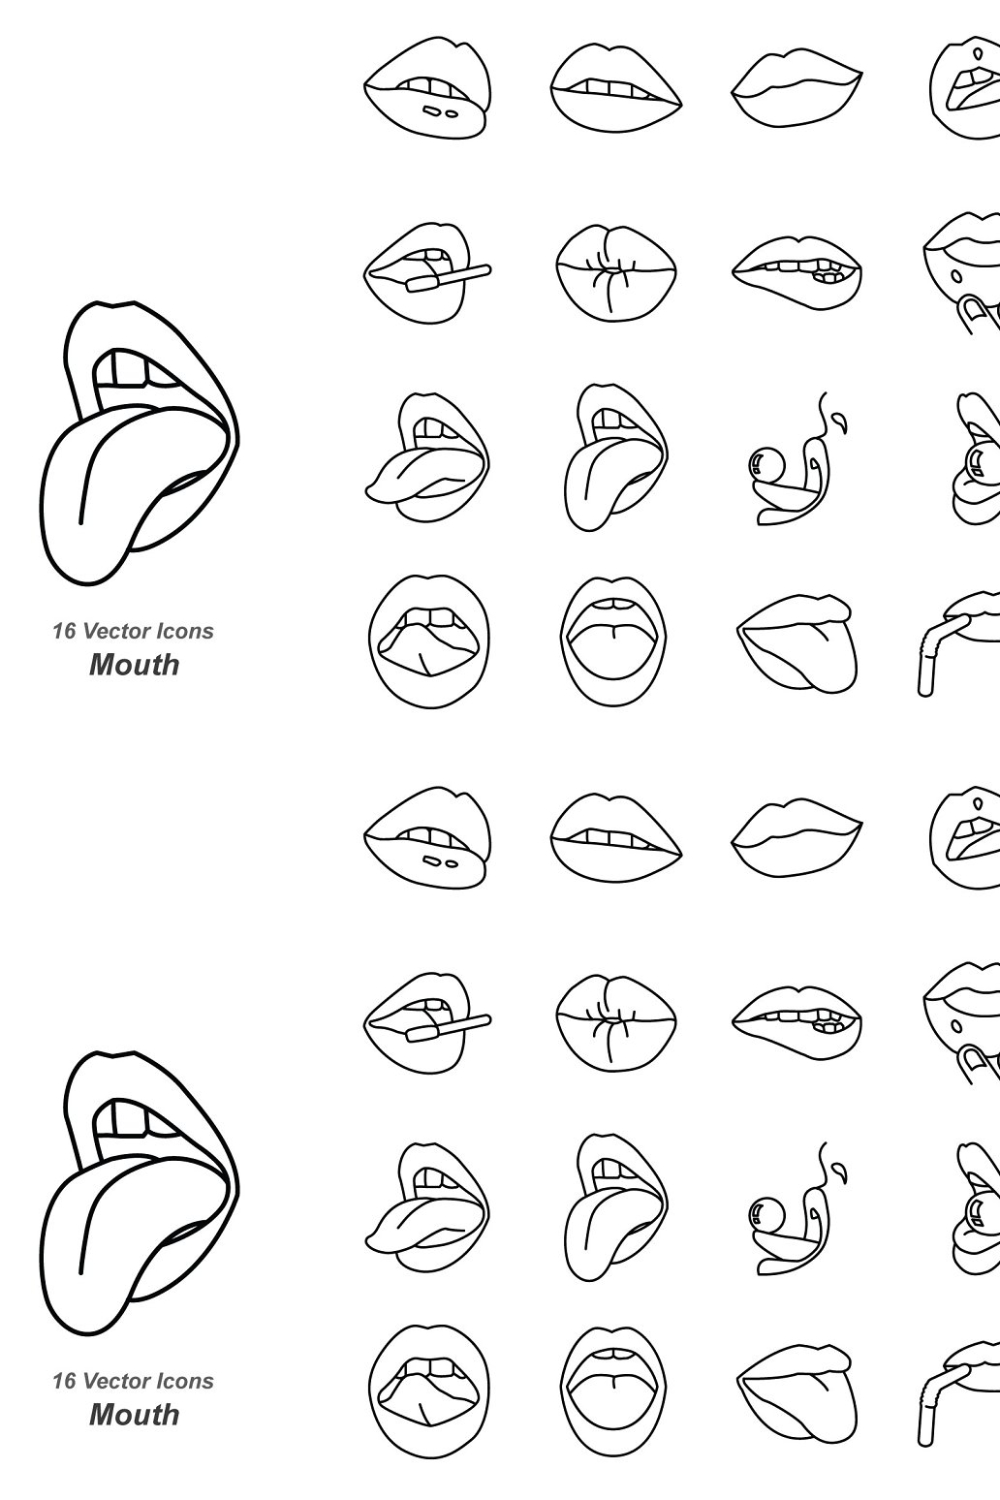 Mouth Outline Vector Icons - Pinterest.